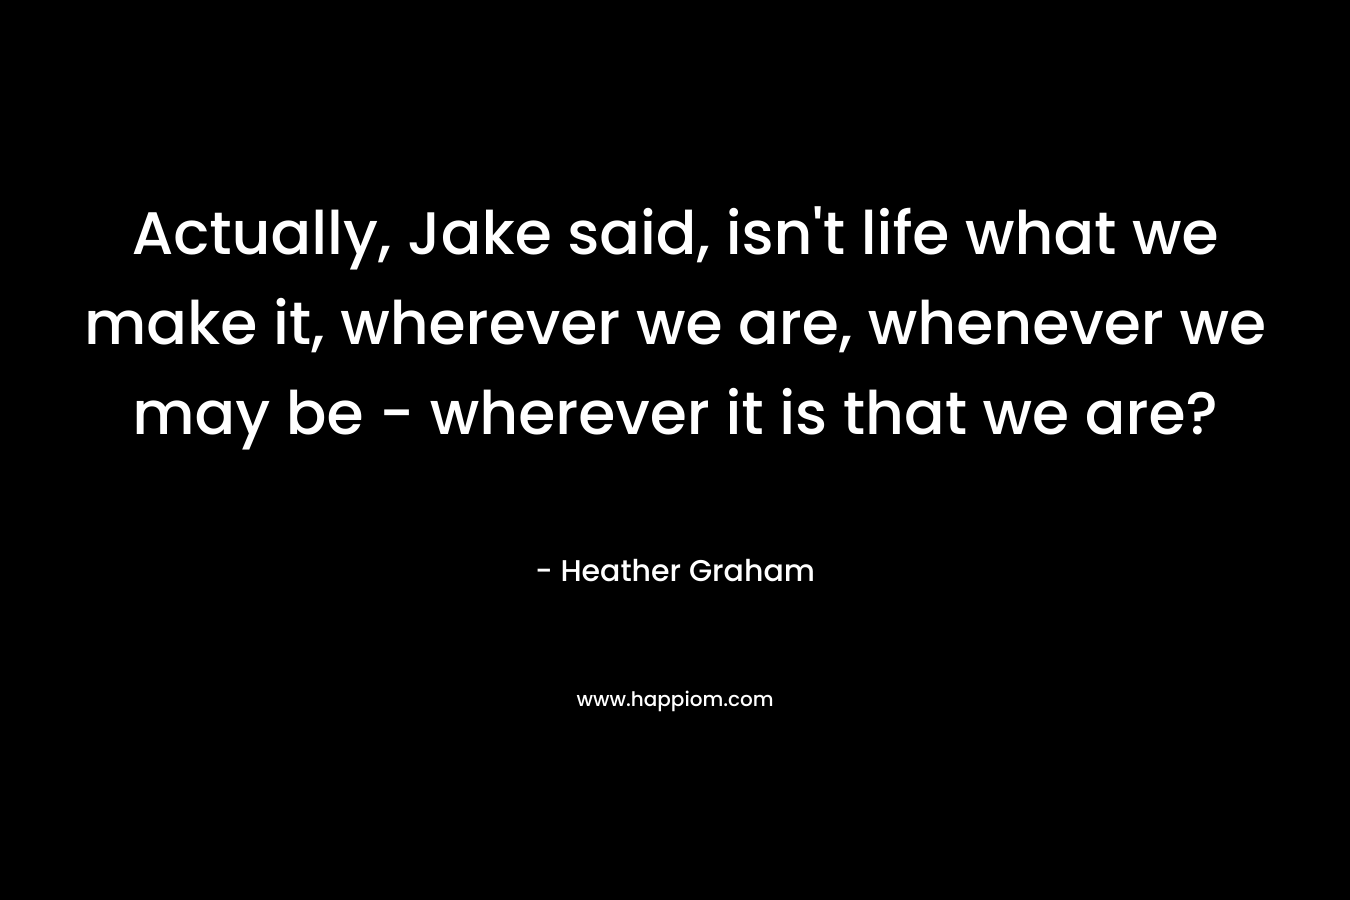 Actually, Jake said, isn't life what we make it, wherever we are, whenever we may be - wherever it is that we are?